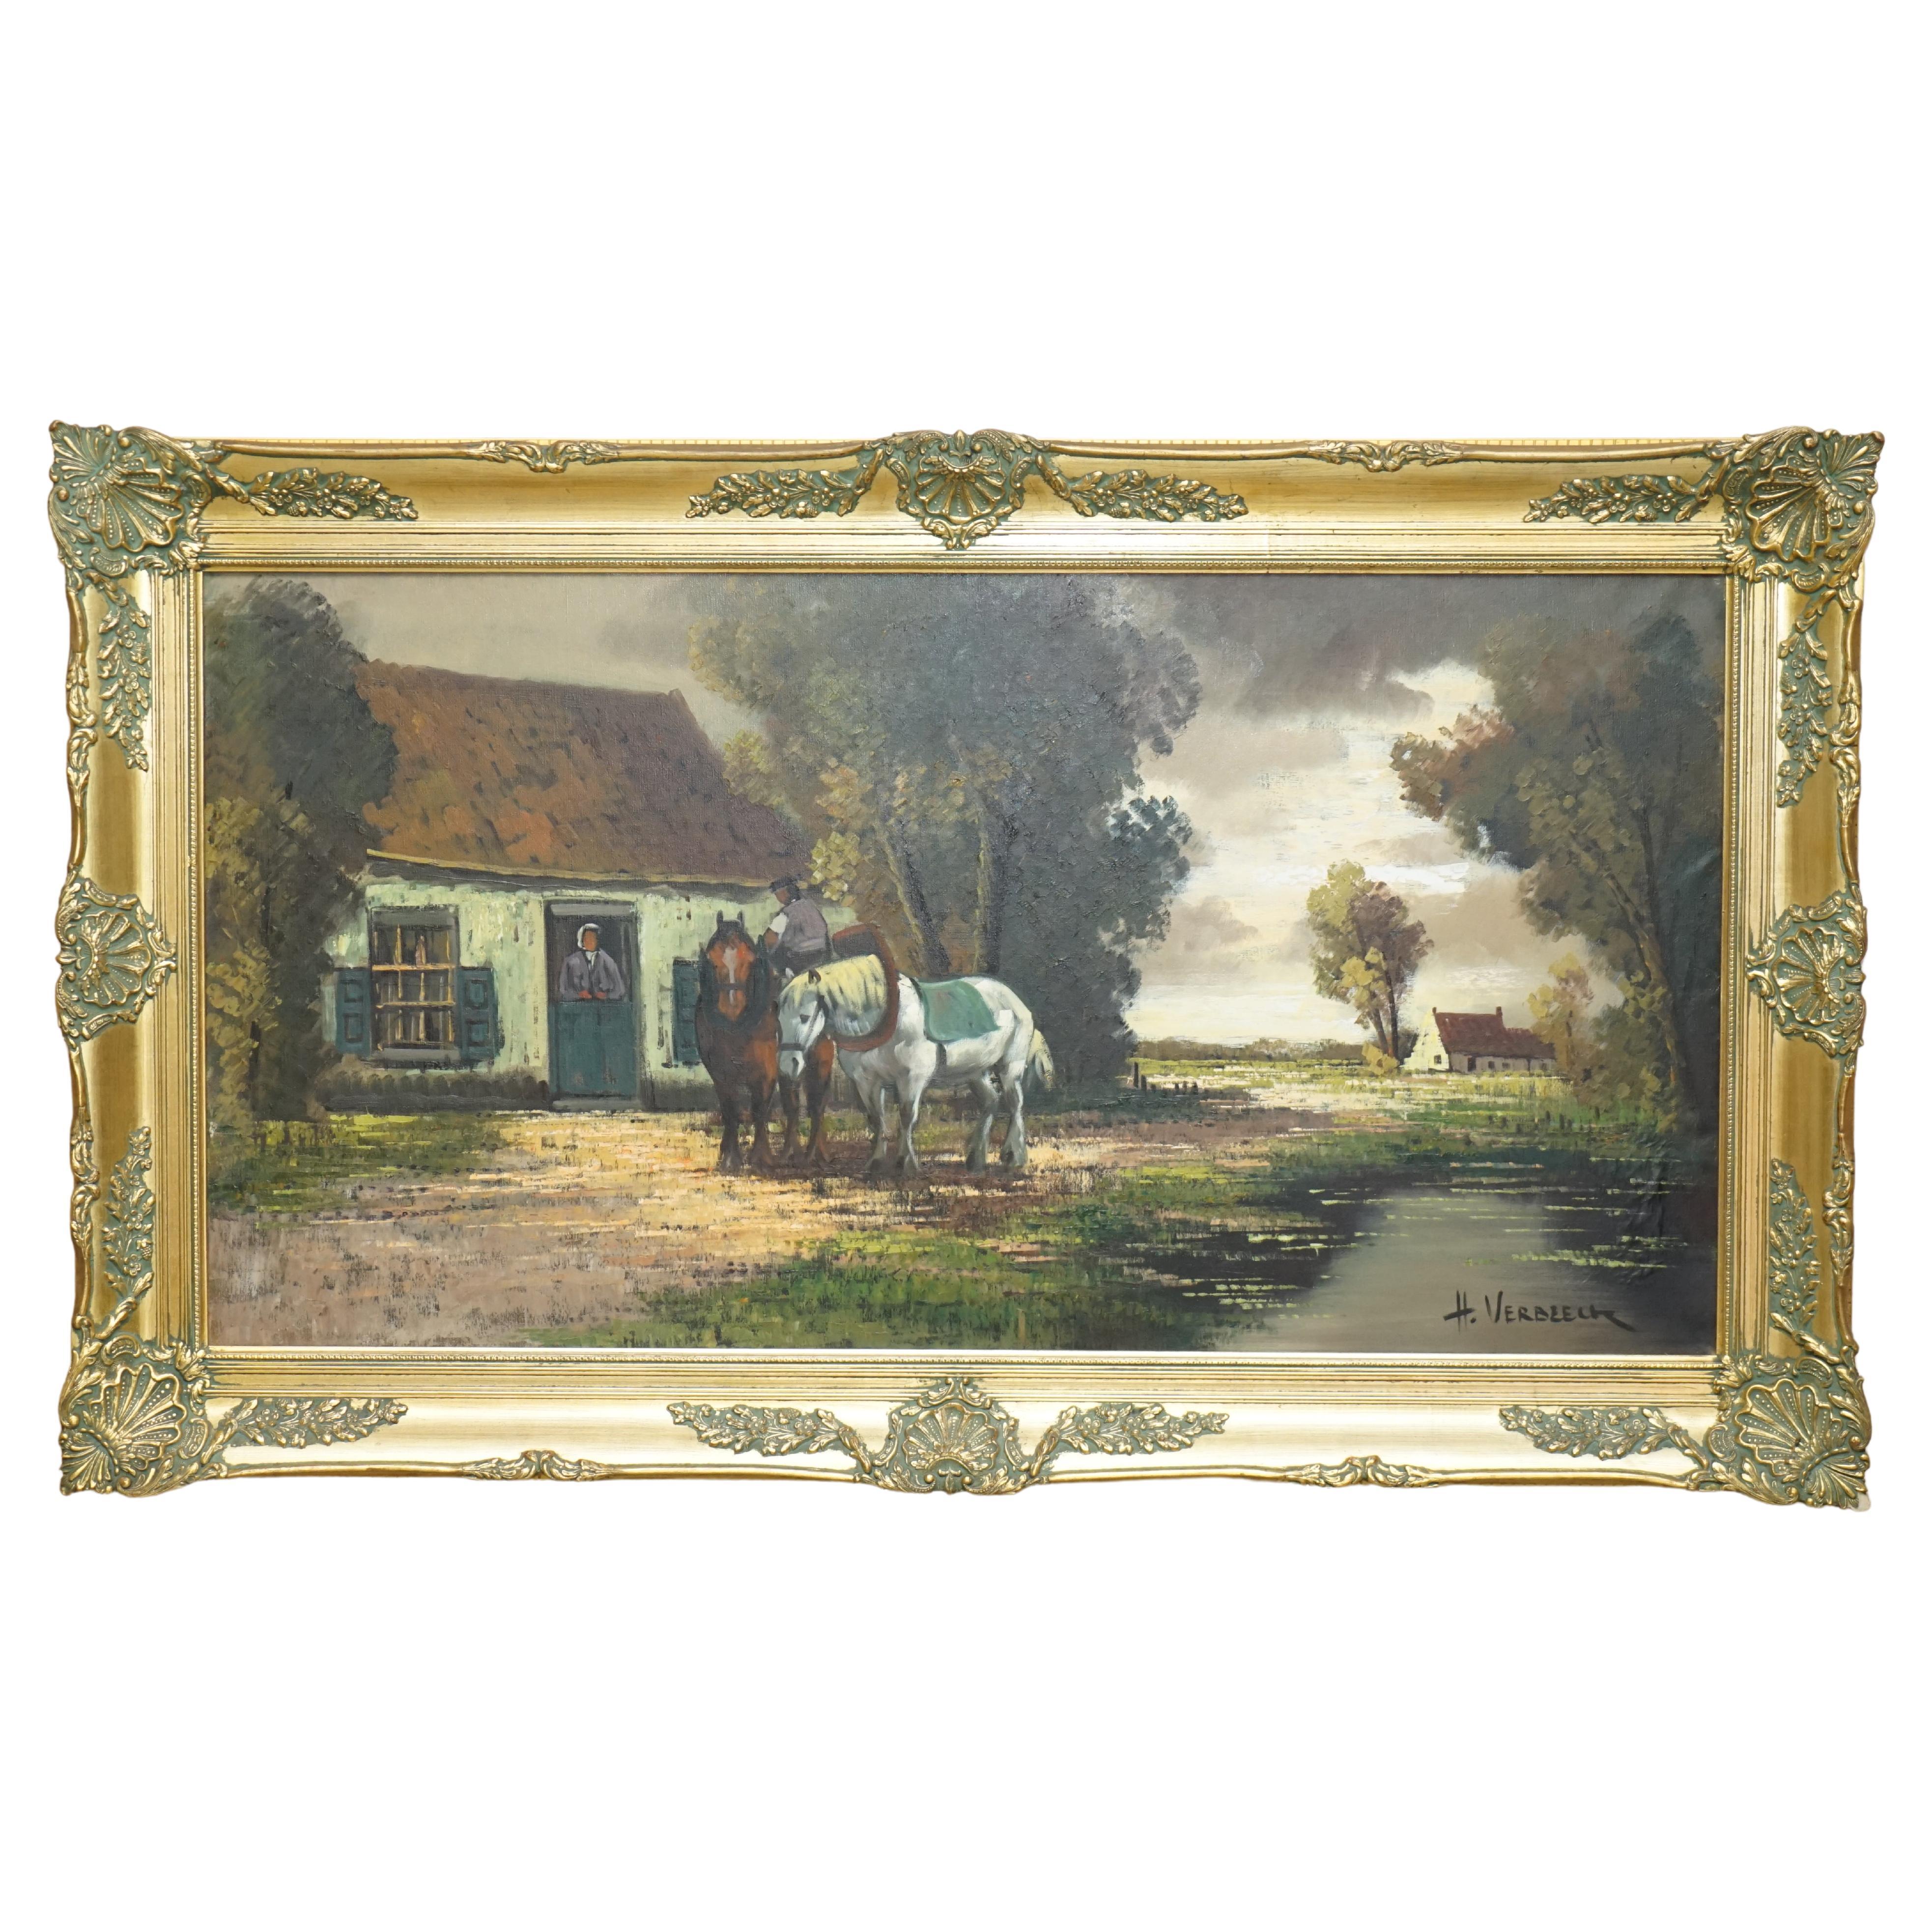 EXTRA LARGE 159X94CM H. VERBEELK SiGNED OIL PAINTING OF A RURAL SCENE WITH HORSE For Sale